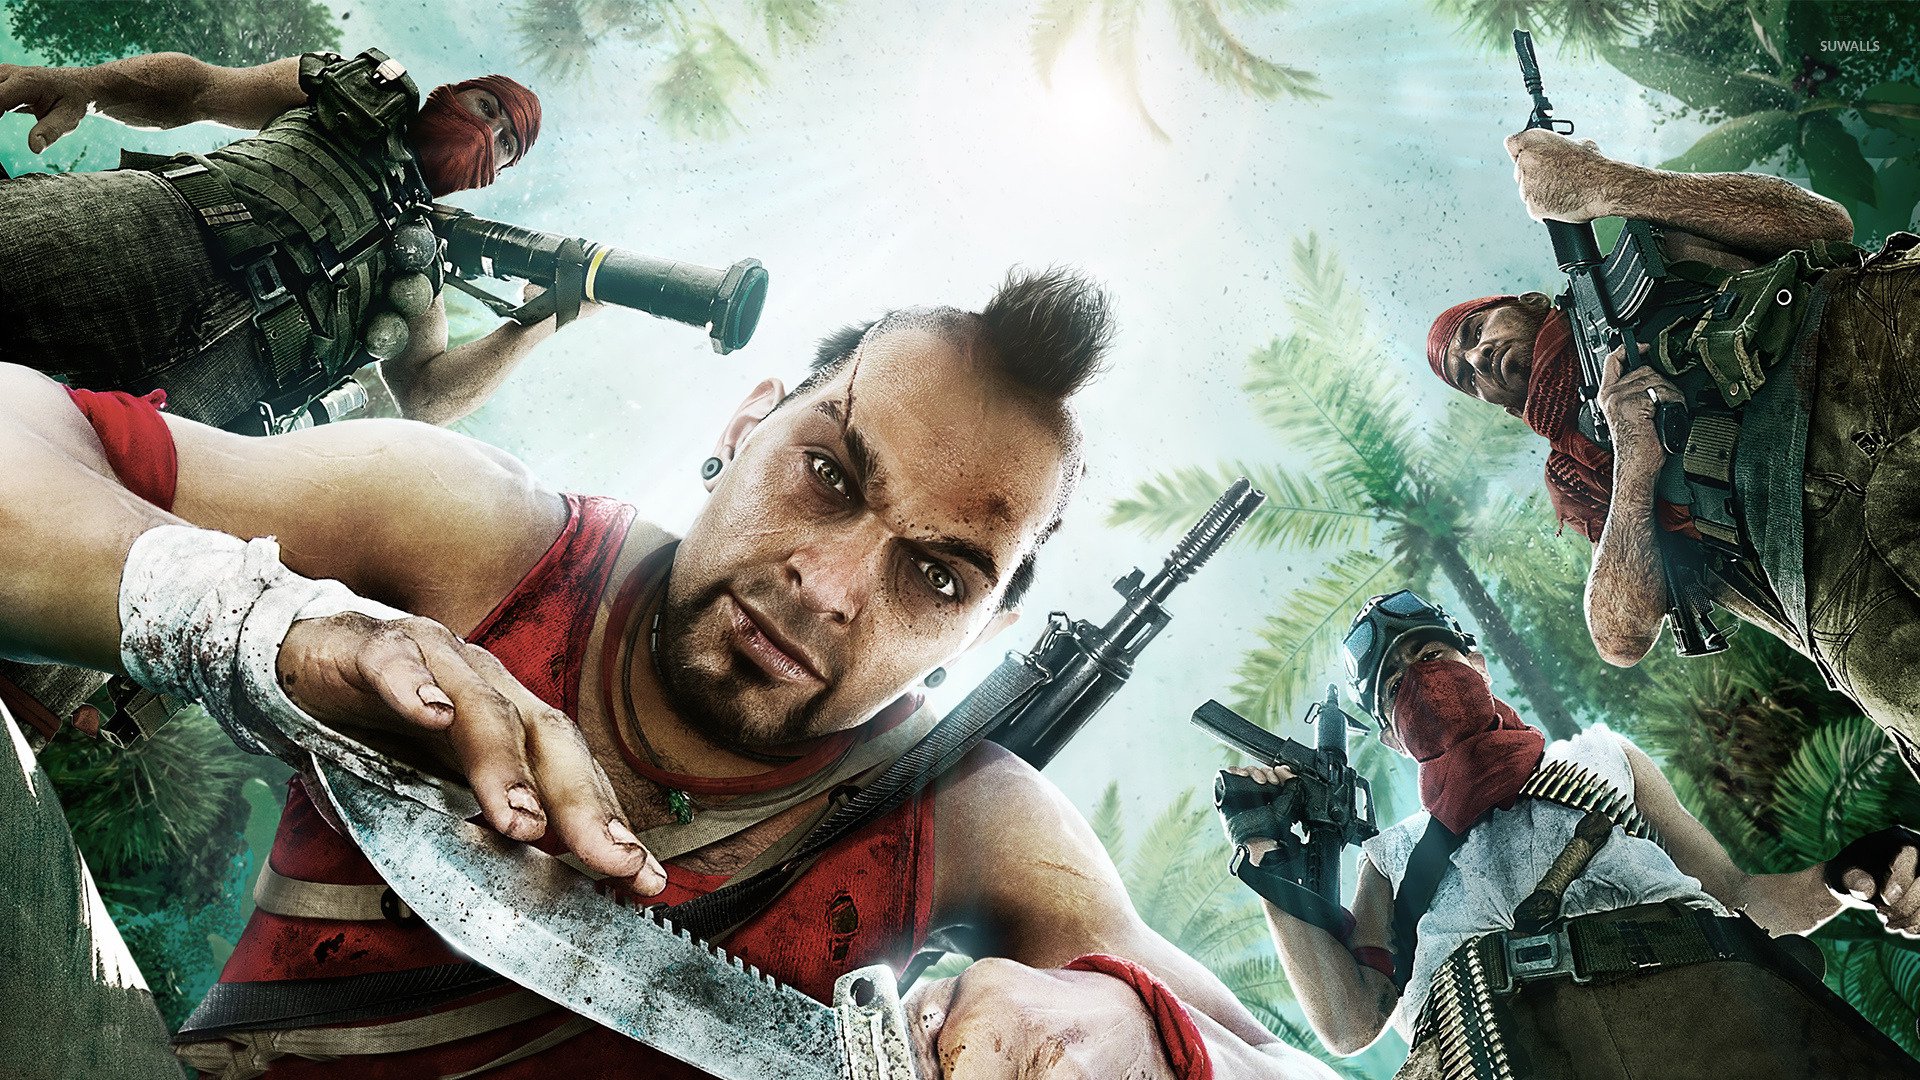 Vaas   Far Cry 3 wallpaper   Game wallpapers   16019 1920x1080